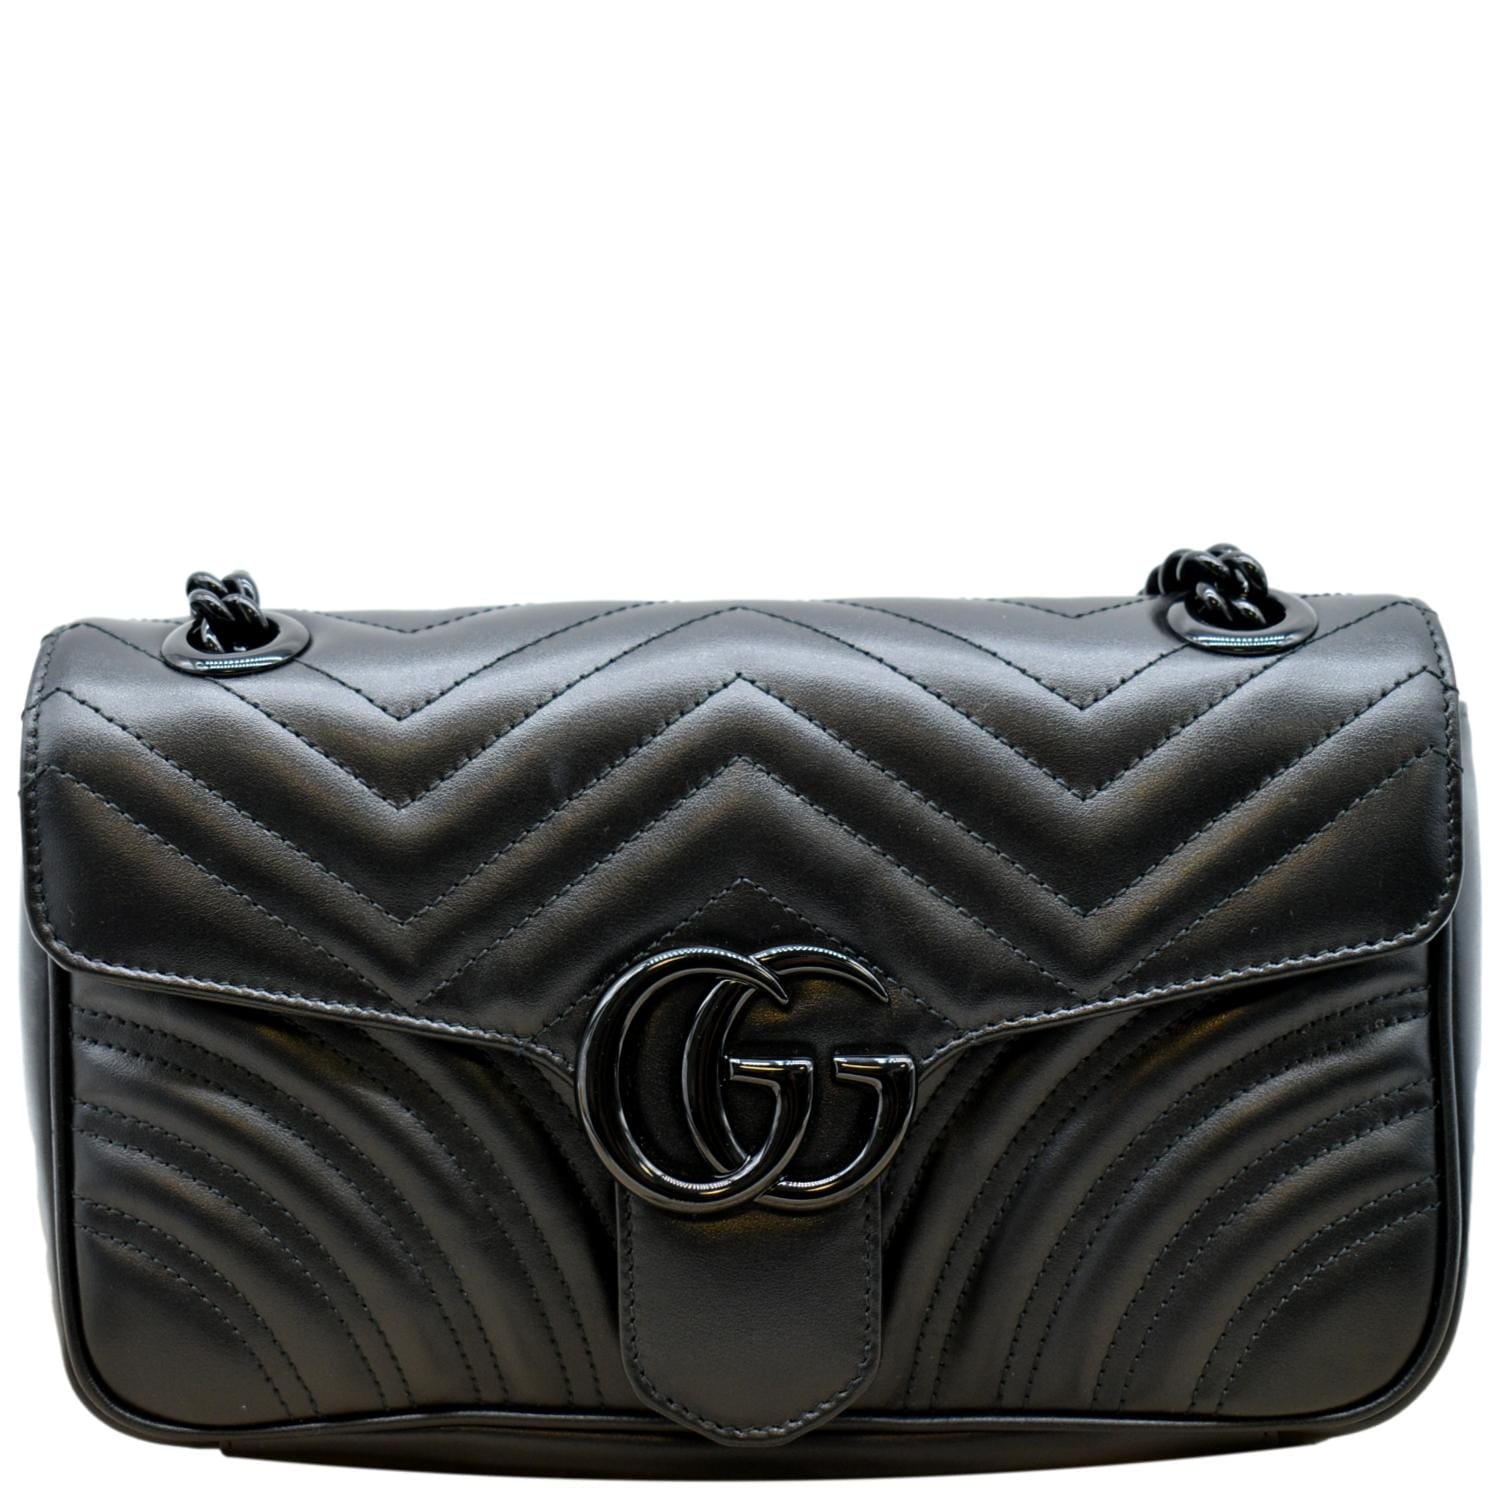 Gucci GG Marmont Small Black Leather Women's Shoulder Bag